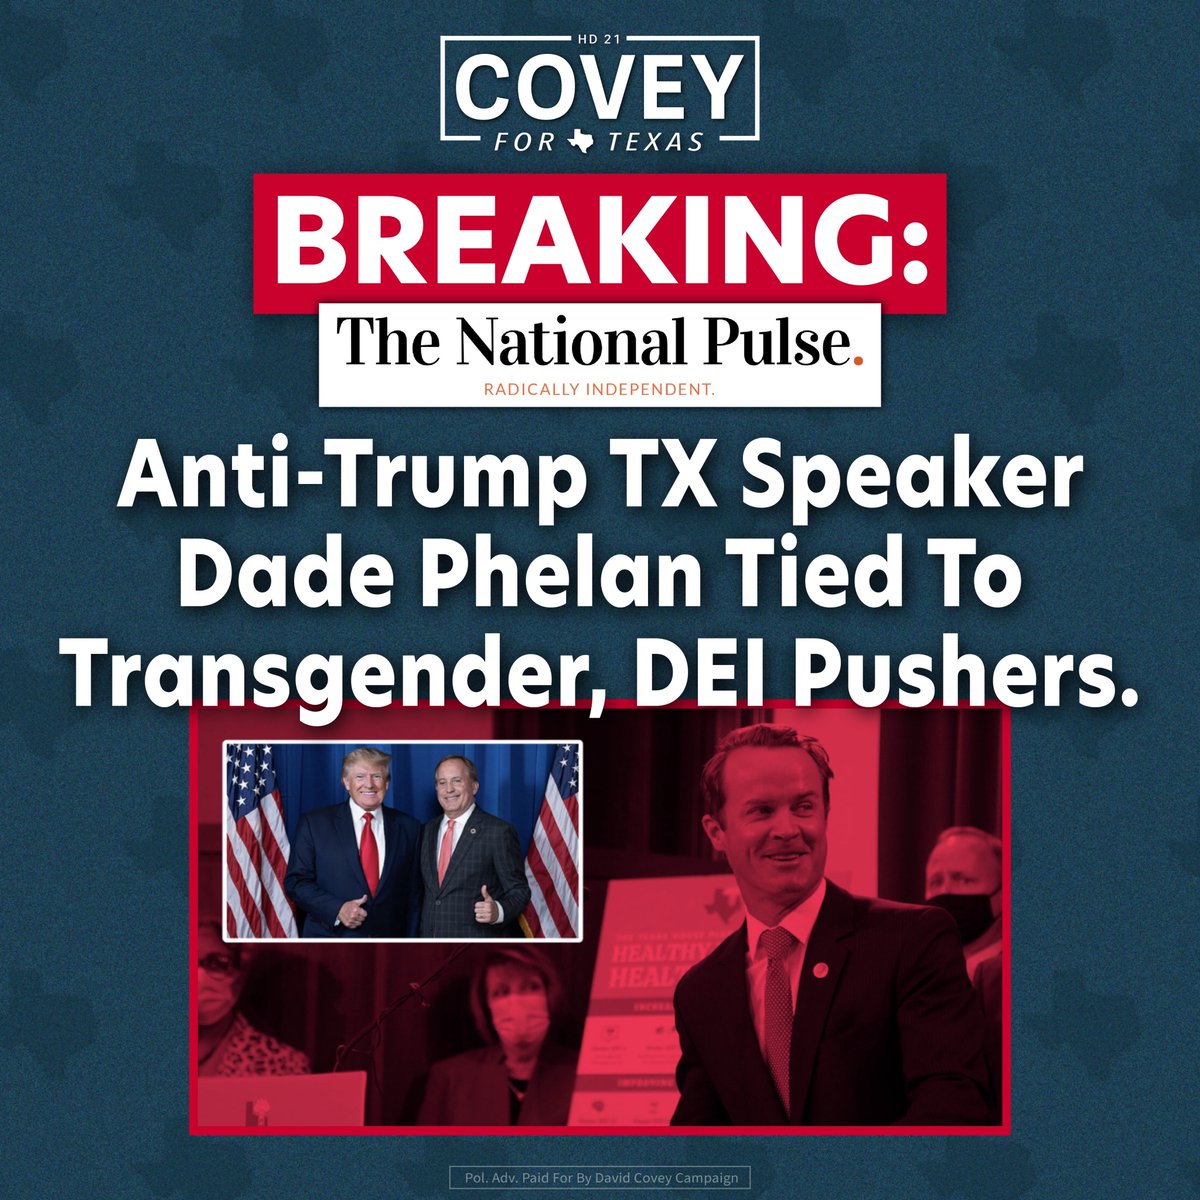 “Embattled Texas House Speaker Dade Phelan, who is trailing his Trump-endorsed primary opponent David Covey in a May 28 run-off election, maintains concerning ties with far-left transgender and diversity, equity, and inclusion (DEI) advocacy groups across the state.” Read more: